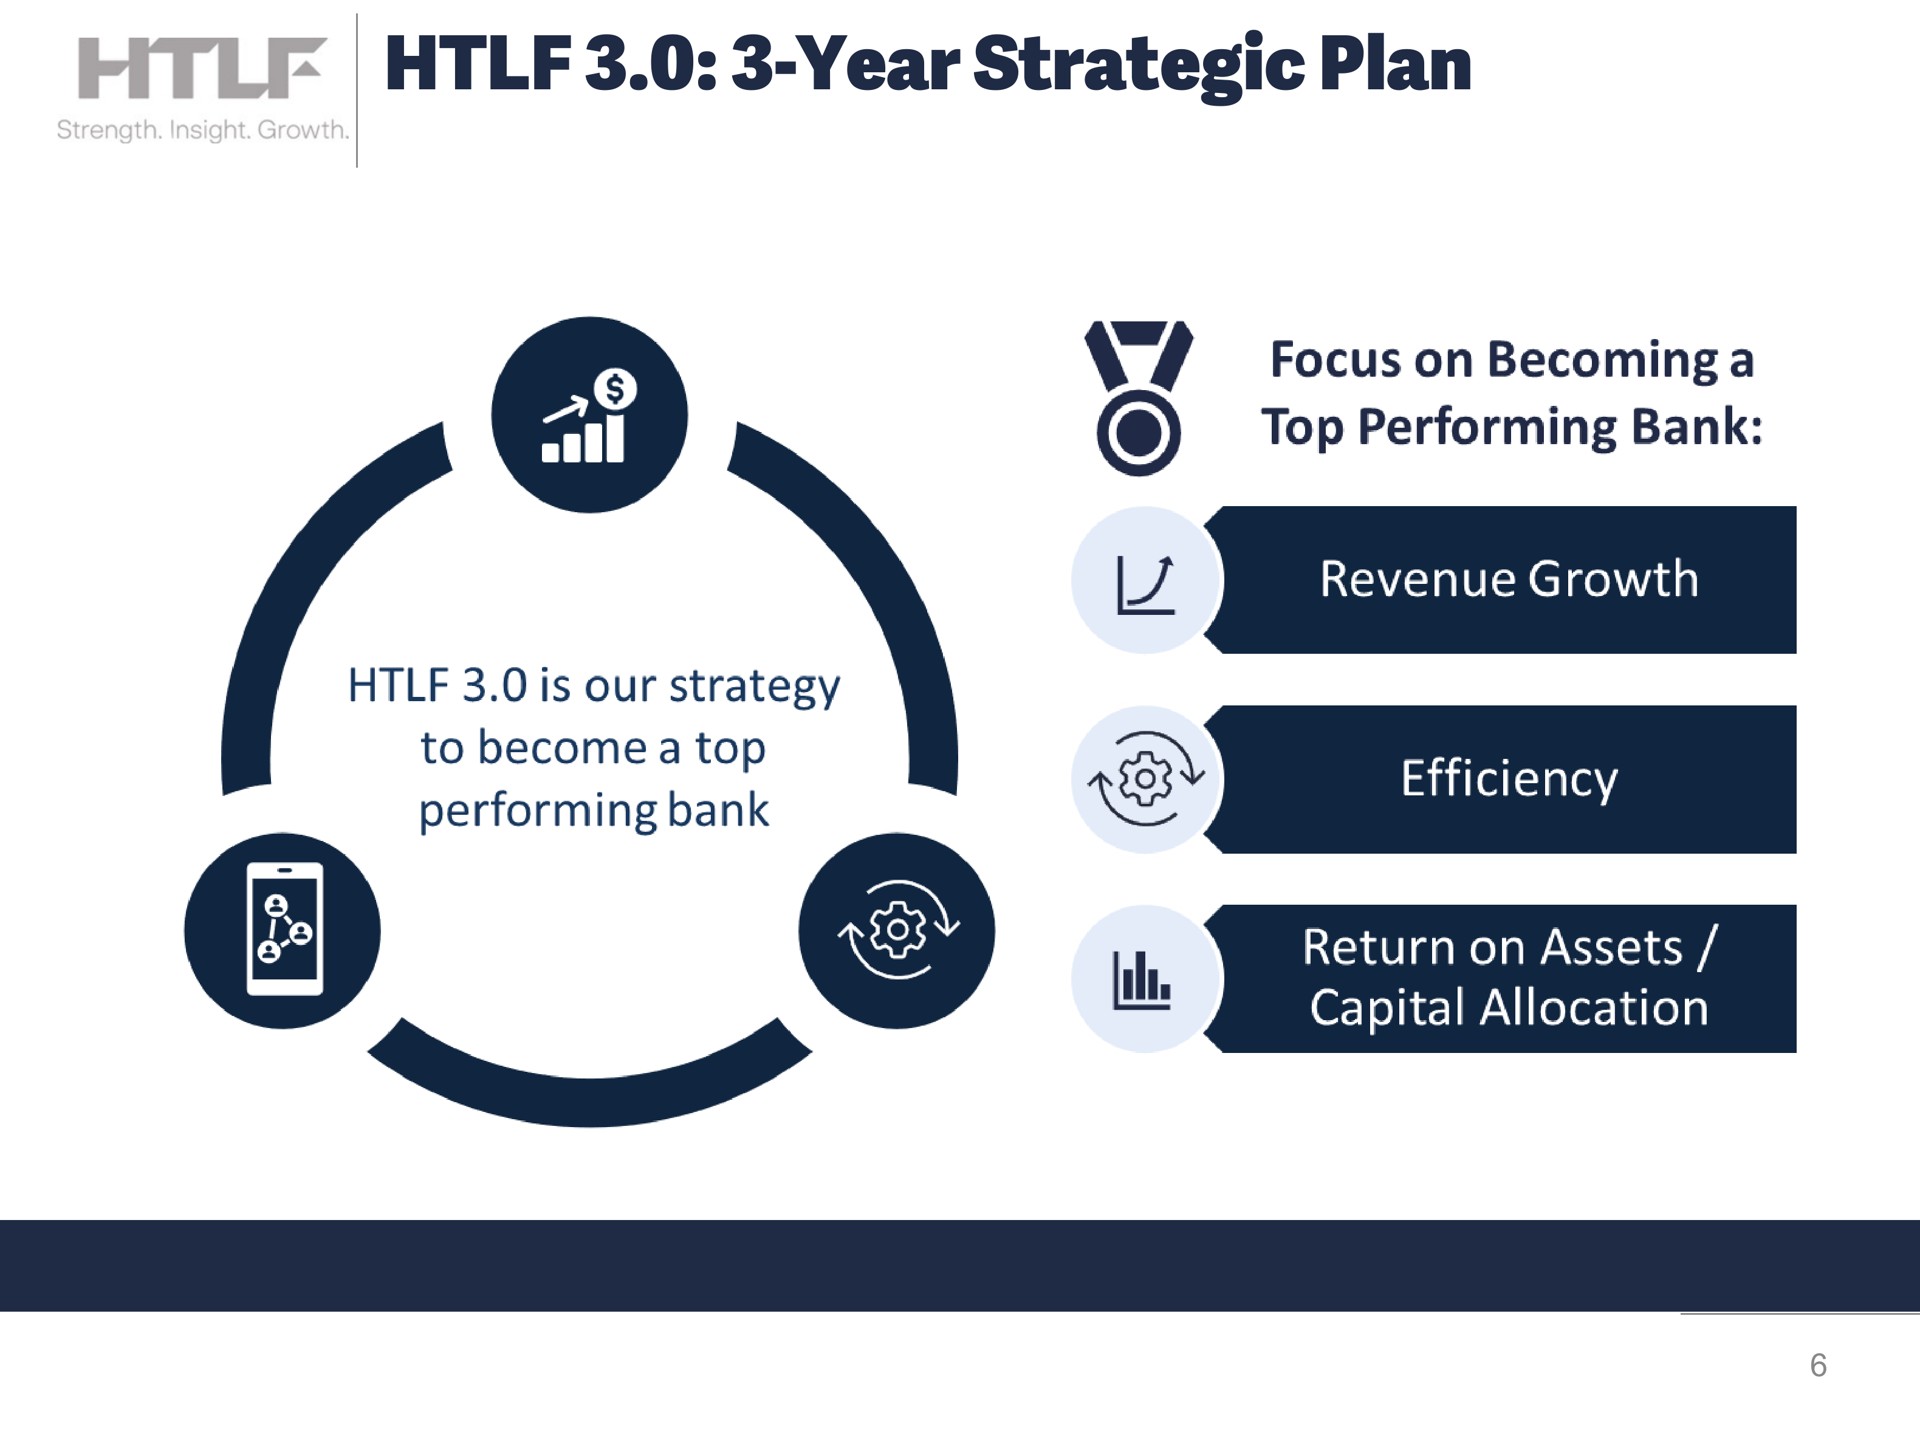 year strategic plan focus on becoming a top performing bank no game am cow a capital allocation wee | Heartland Financial USA